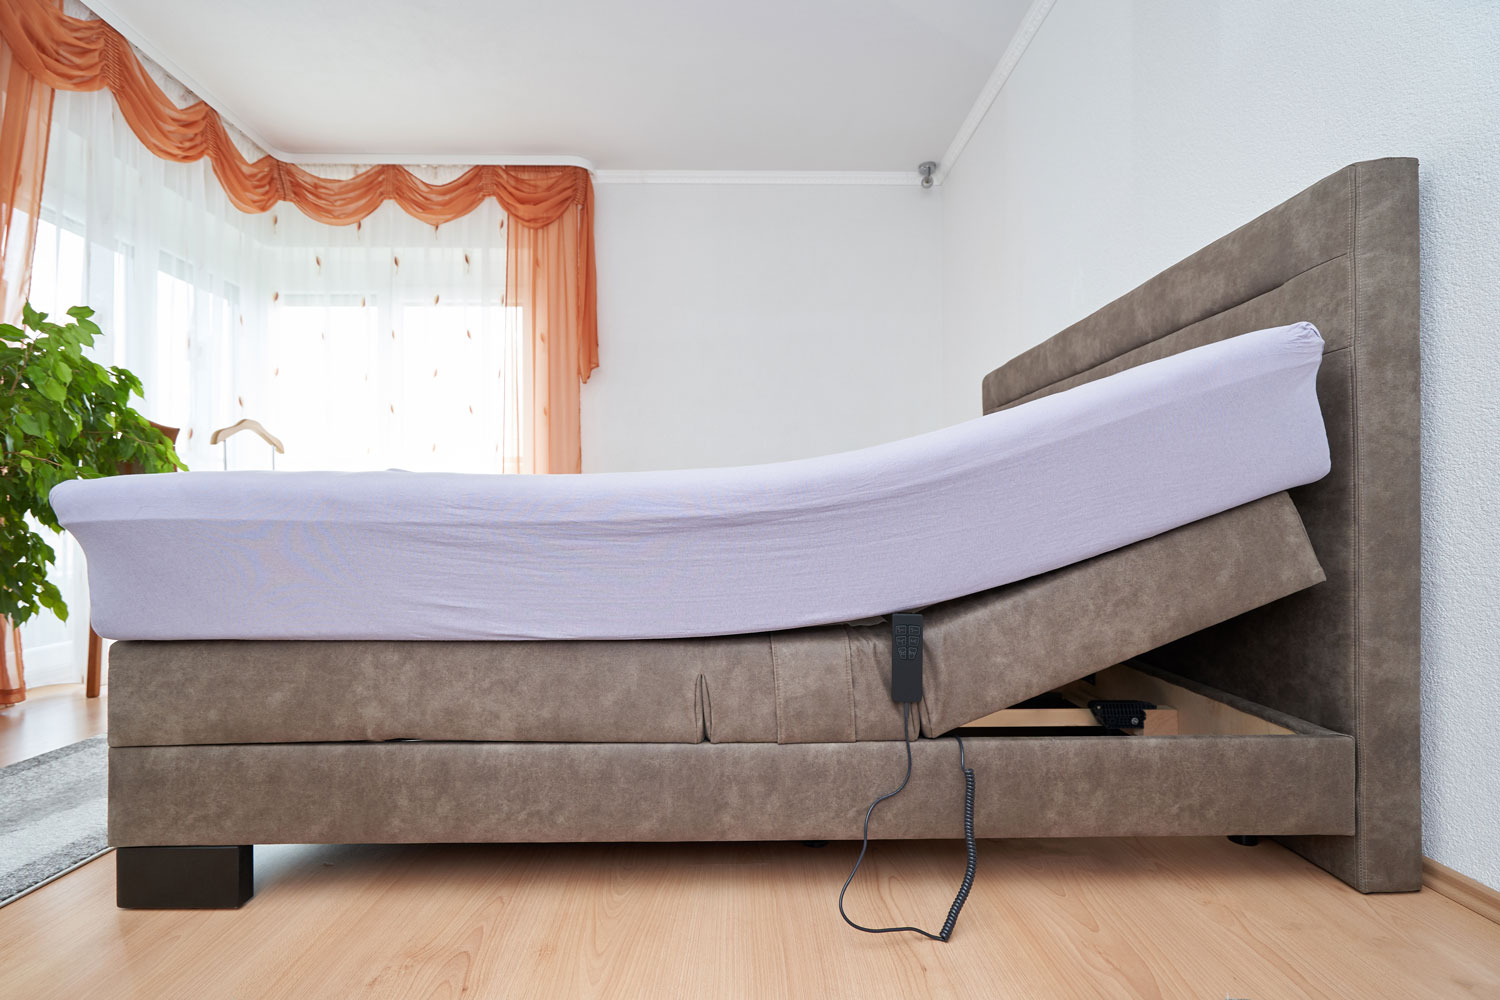 An adjustable mattress lifted due for comfort